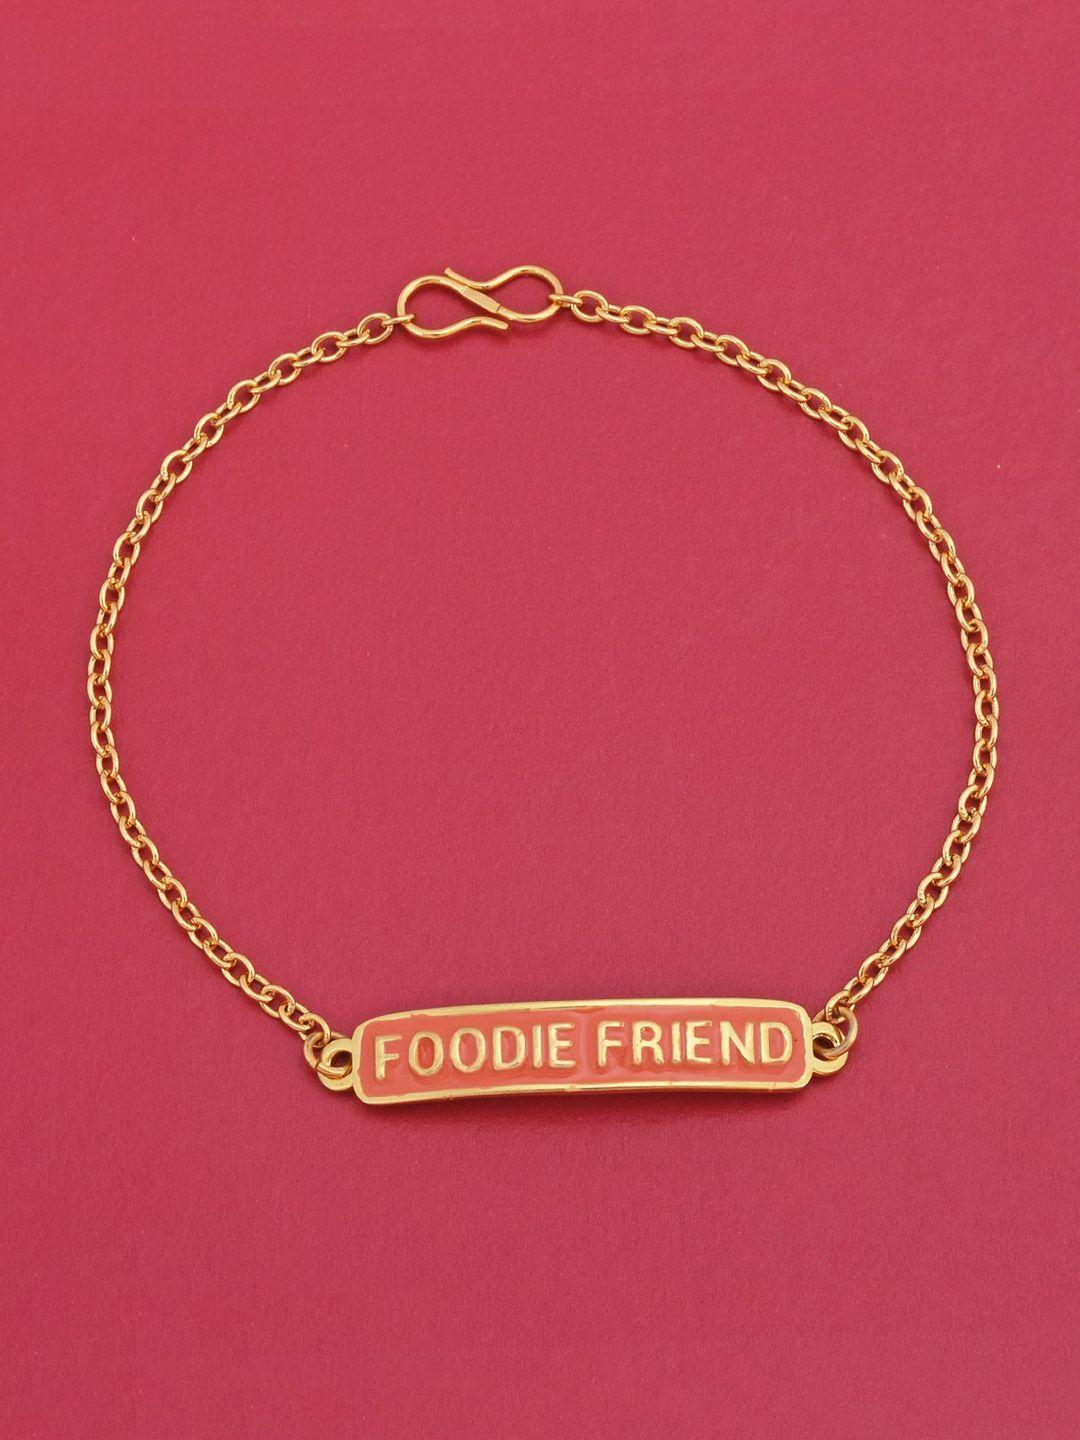 tistabene women gold-toned & red foodie friend engraved charm bracelet